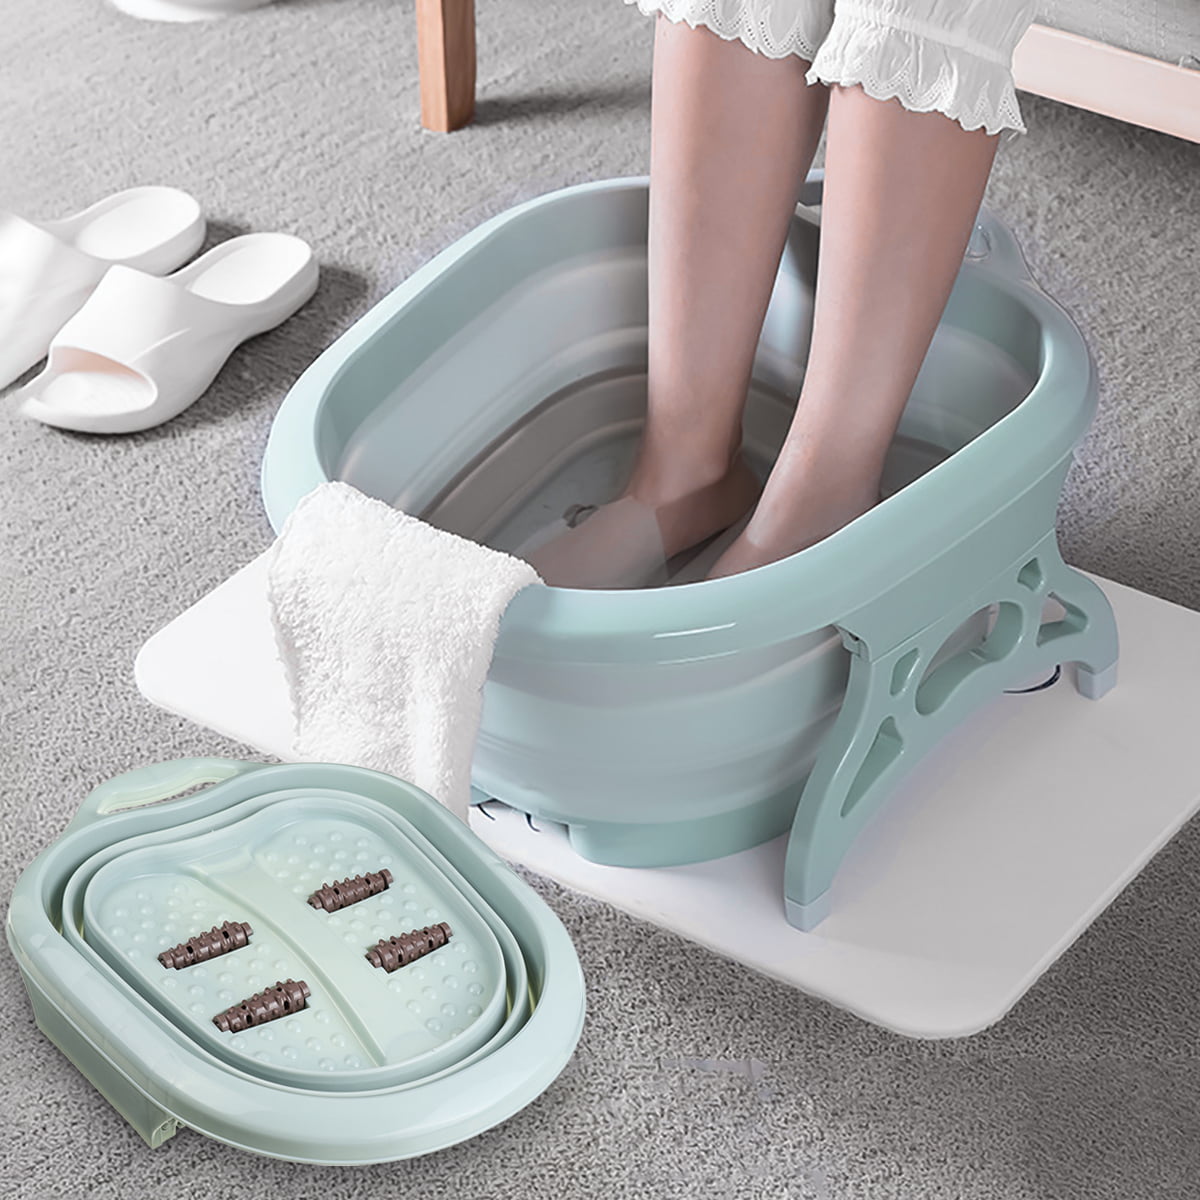 Foot Spa Collapsible Foot Bath Massager,Large Foot Soak Tub for Soaking  with Foot Massage Rollers as Pedicure Kit | Great for Callus Remover Foot  